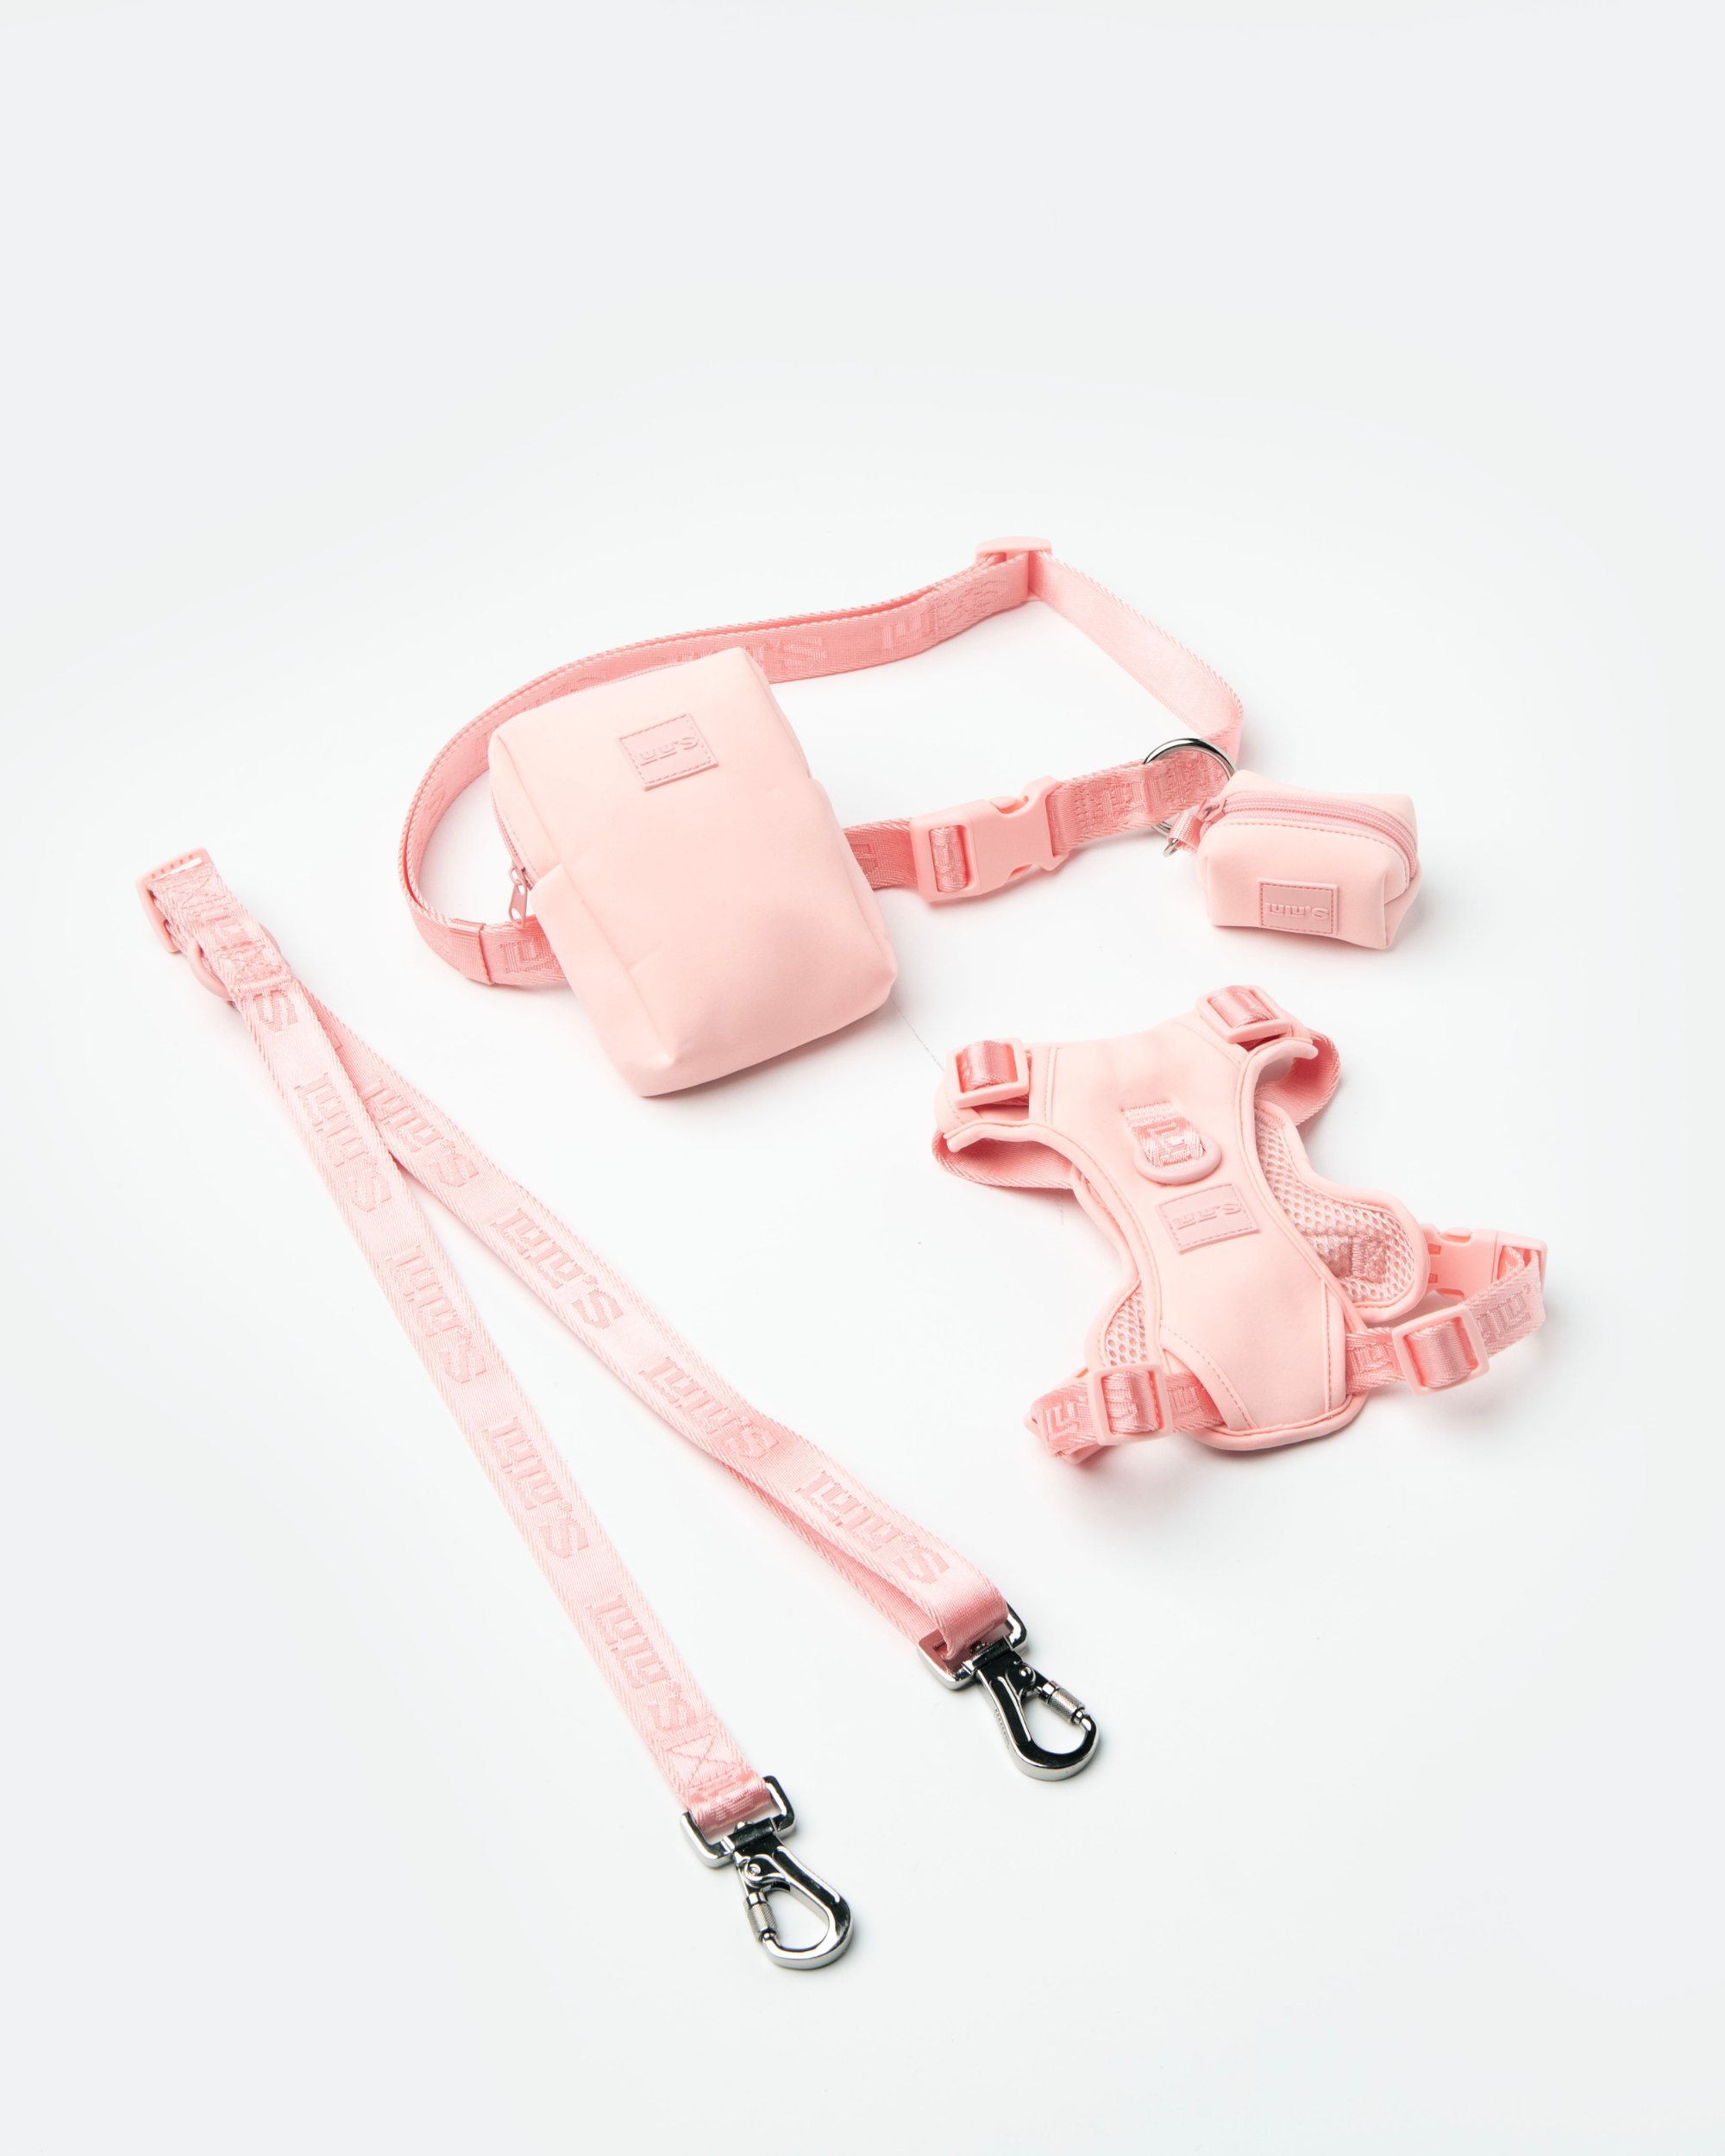 LULU's set in Blush pink, featuring a belt with an accessory pouch, a small poop bag holder, a harness, and a leash. The set showcases coordinated dog walking accessories designed for style and functionality.